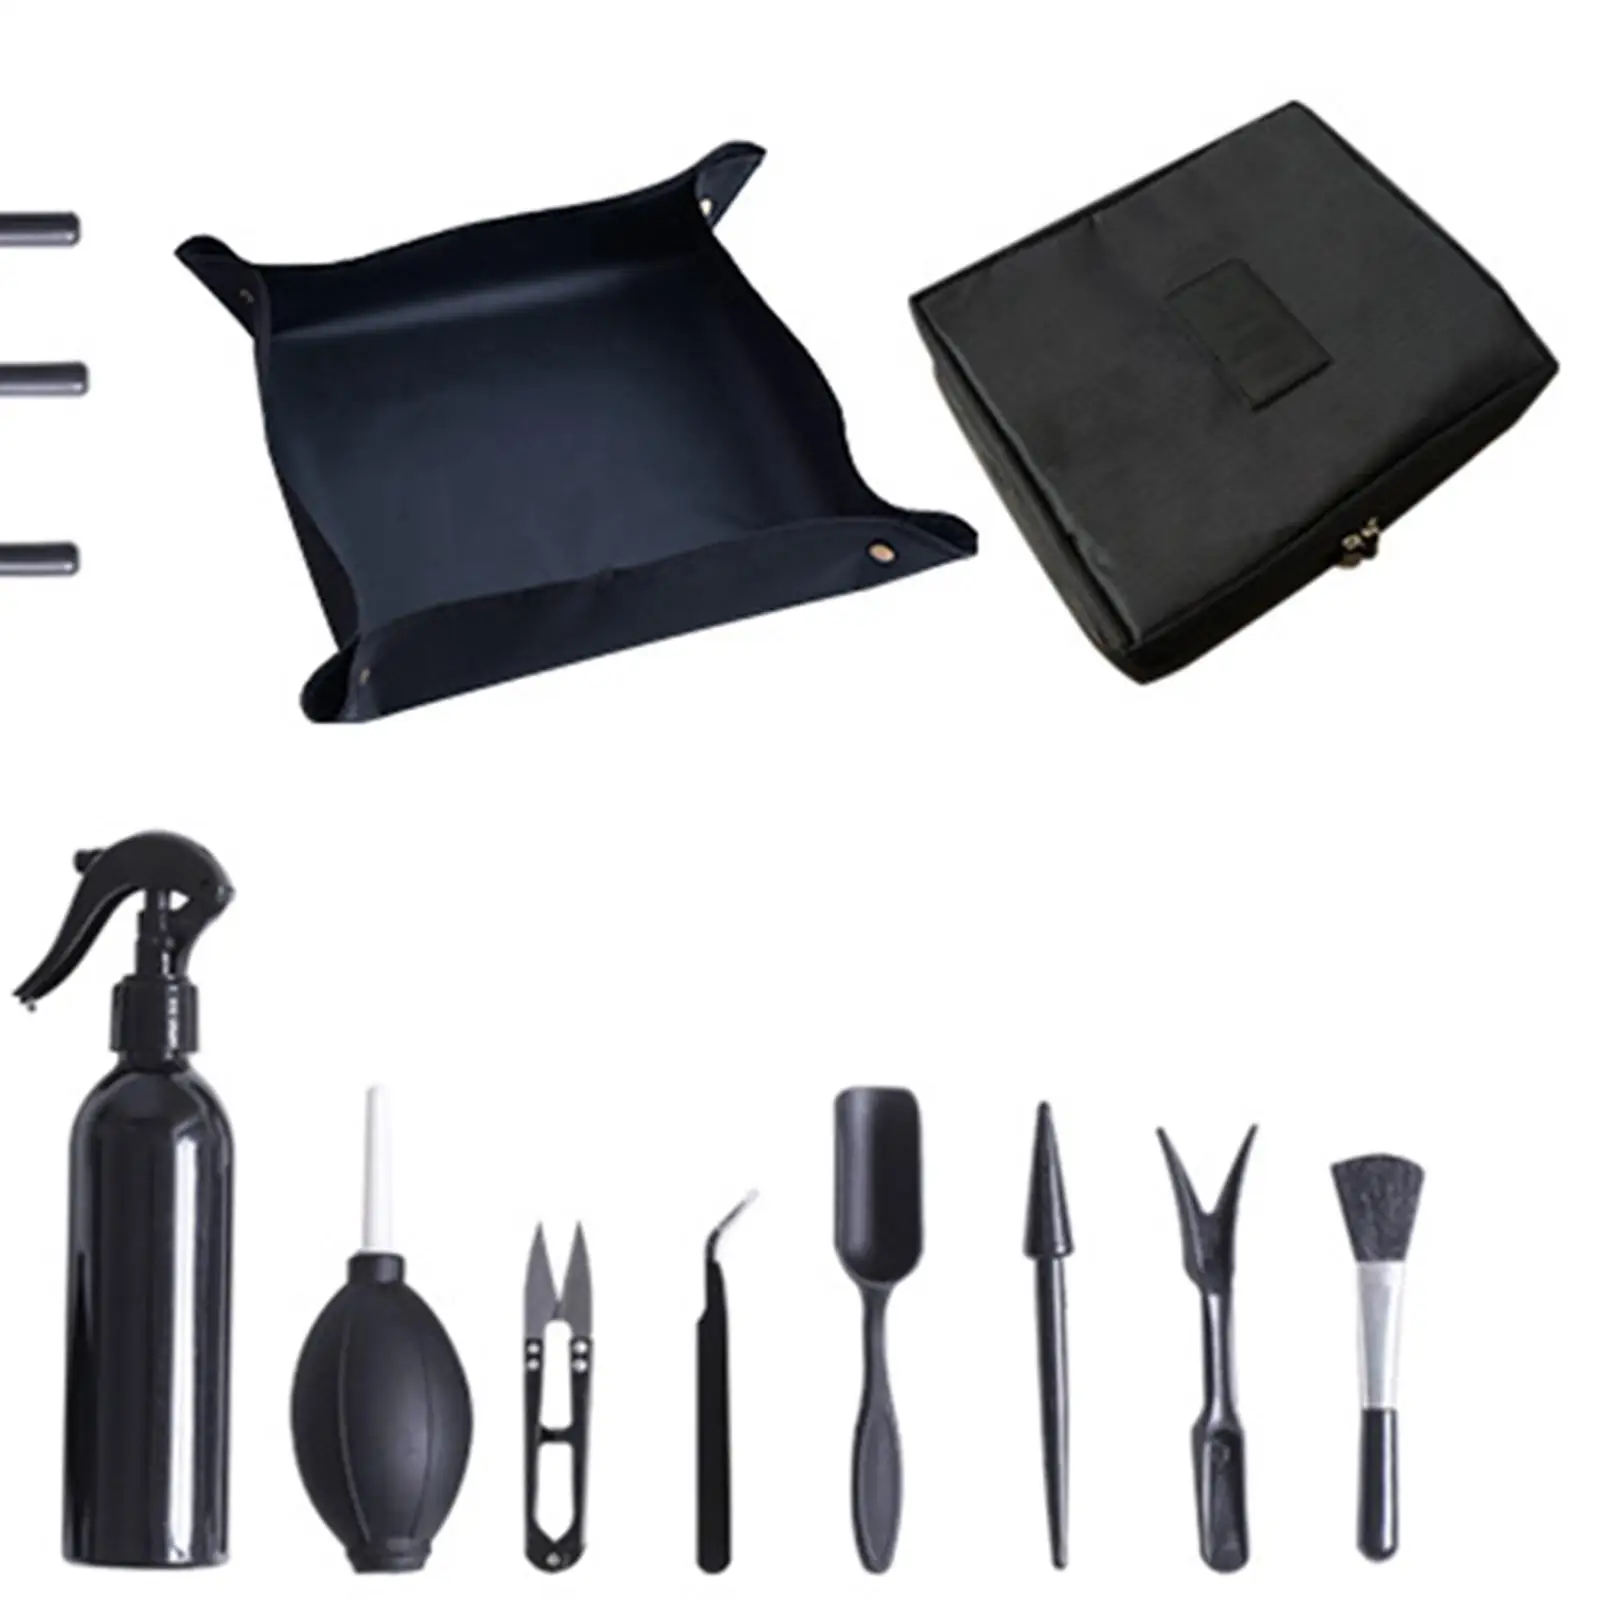 Mini Garden Succulent Transplanting Kit 14Pcs Tools Set Reused Multiple Times Stainless Steel, PP Materials Professional Durable